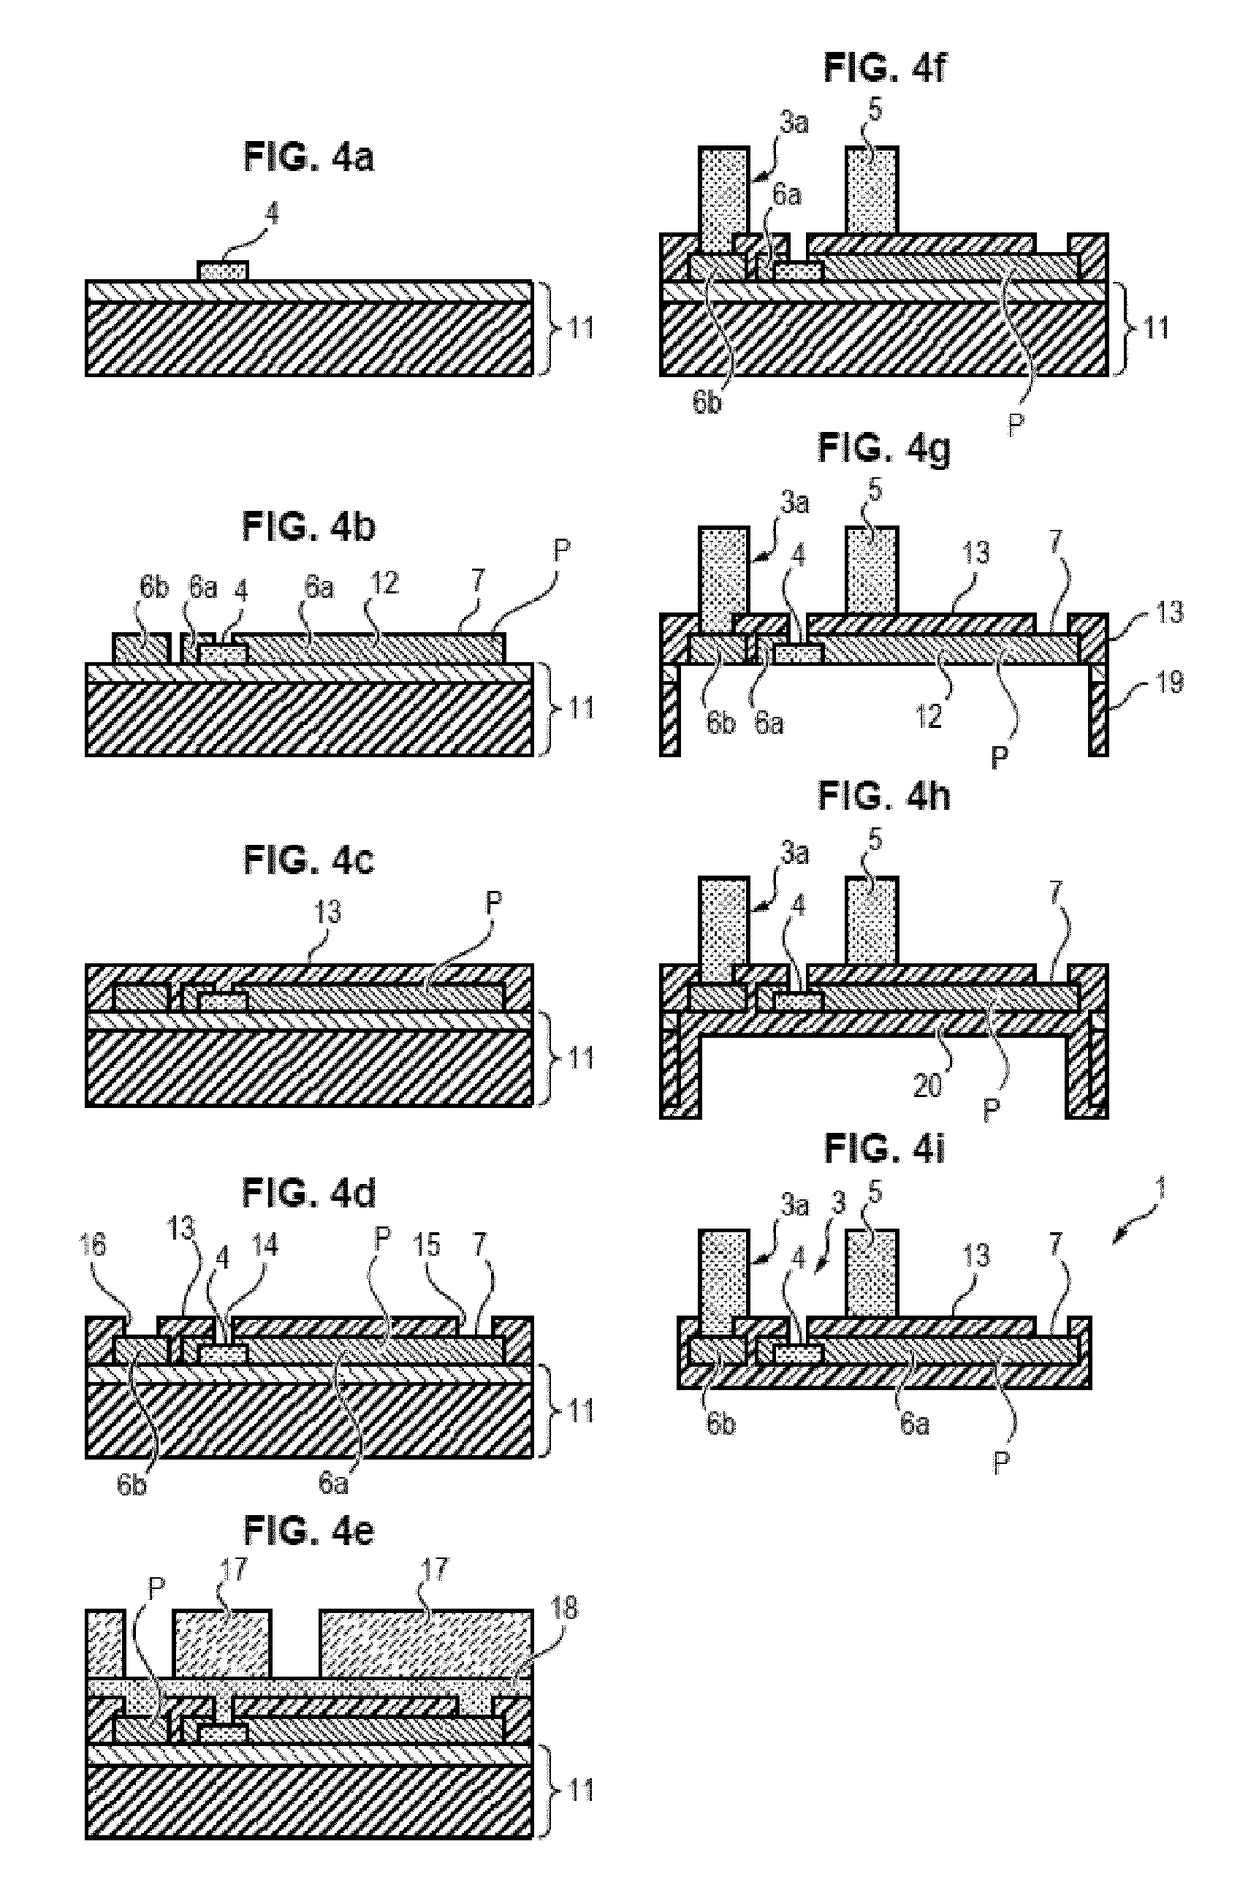 Process for manufacturing an implant for focal electrical stimulation of a nervous structure